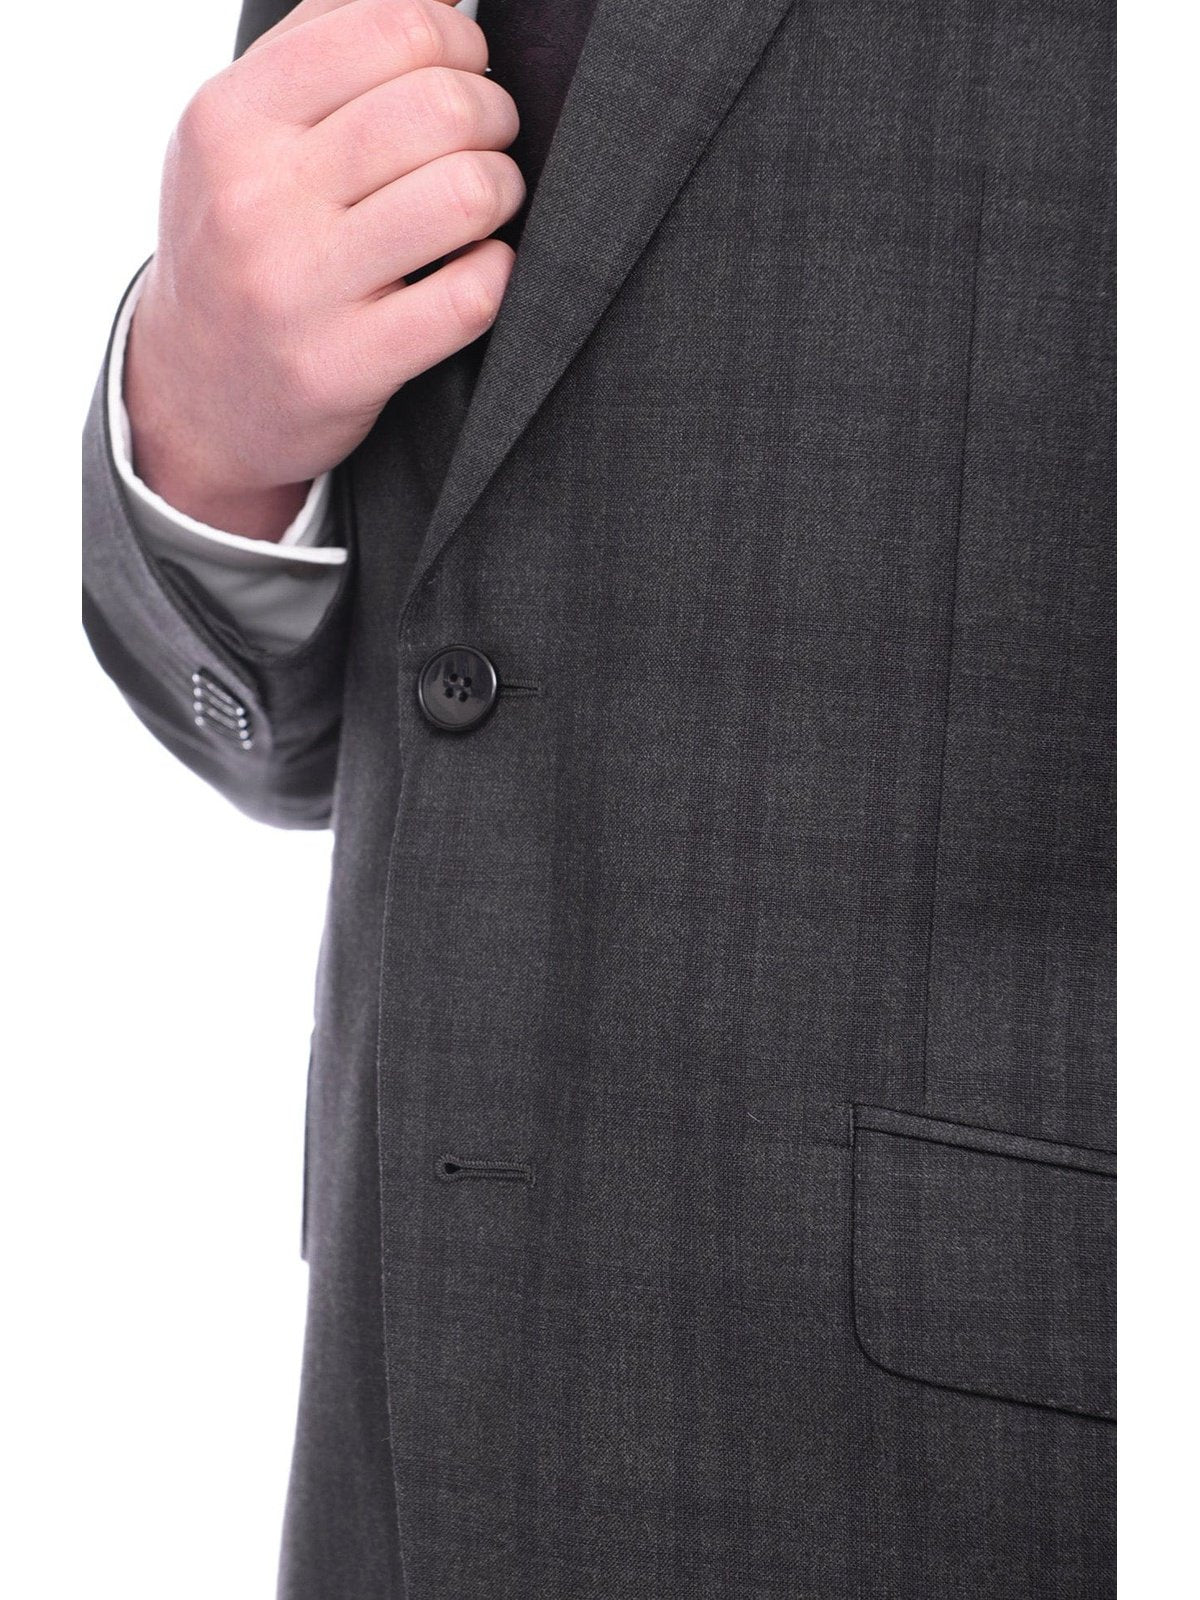 Napoli TWO PIECE SUITS Napoli Slim Fit Charcoal Gray &amp; Purple Plaid Half Canvassed Super 150s Wool Suit